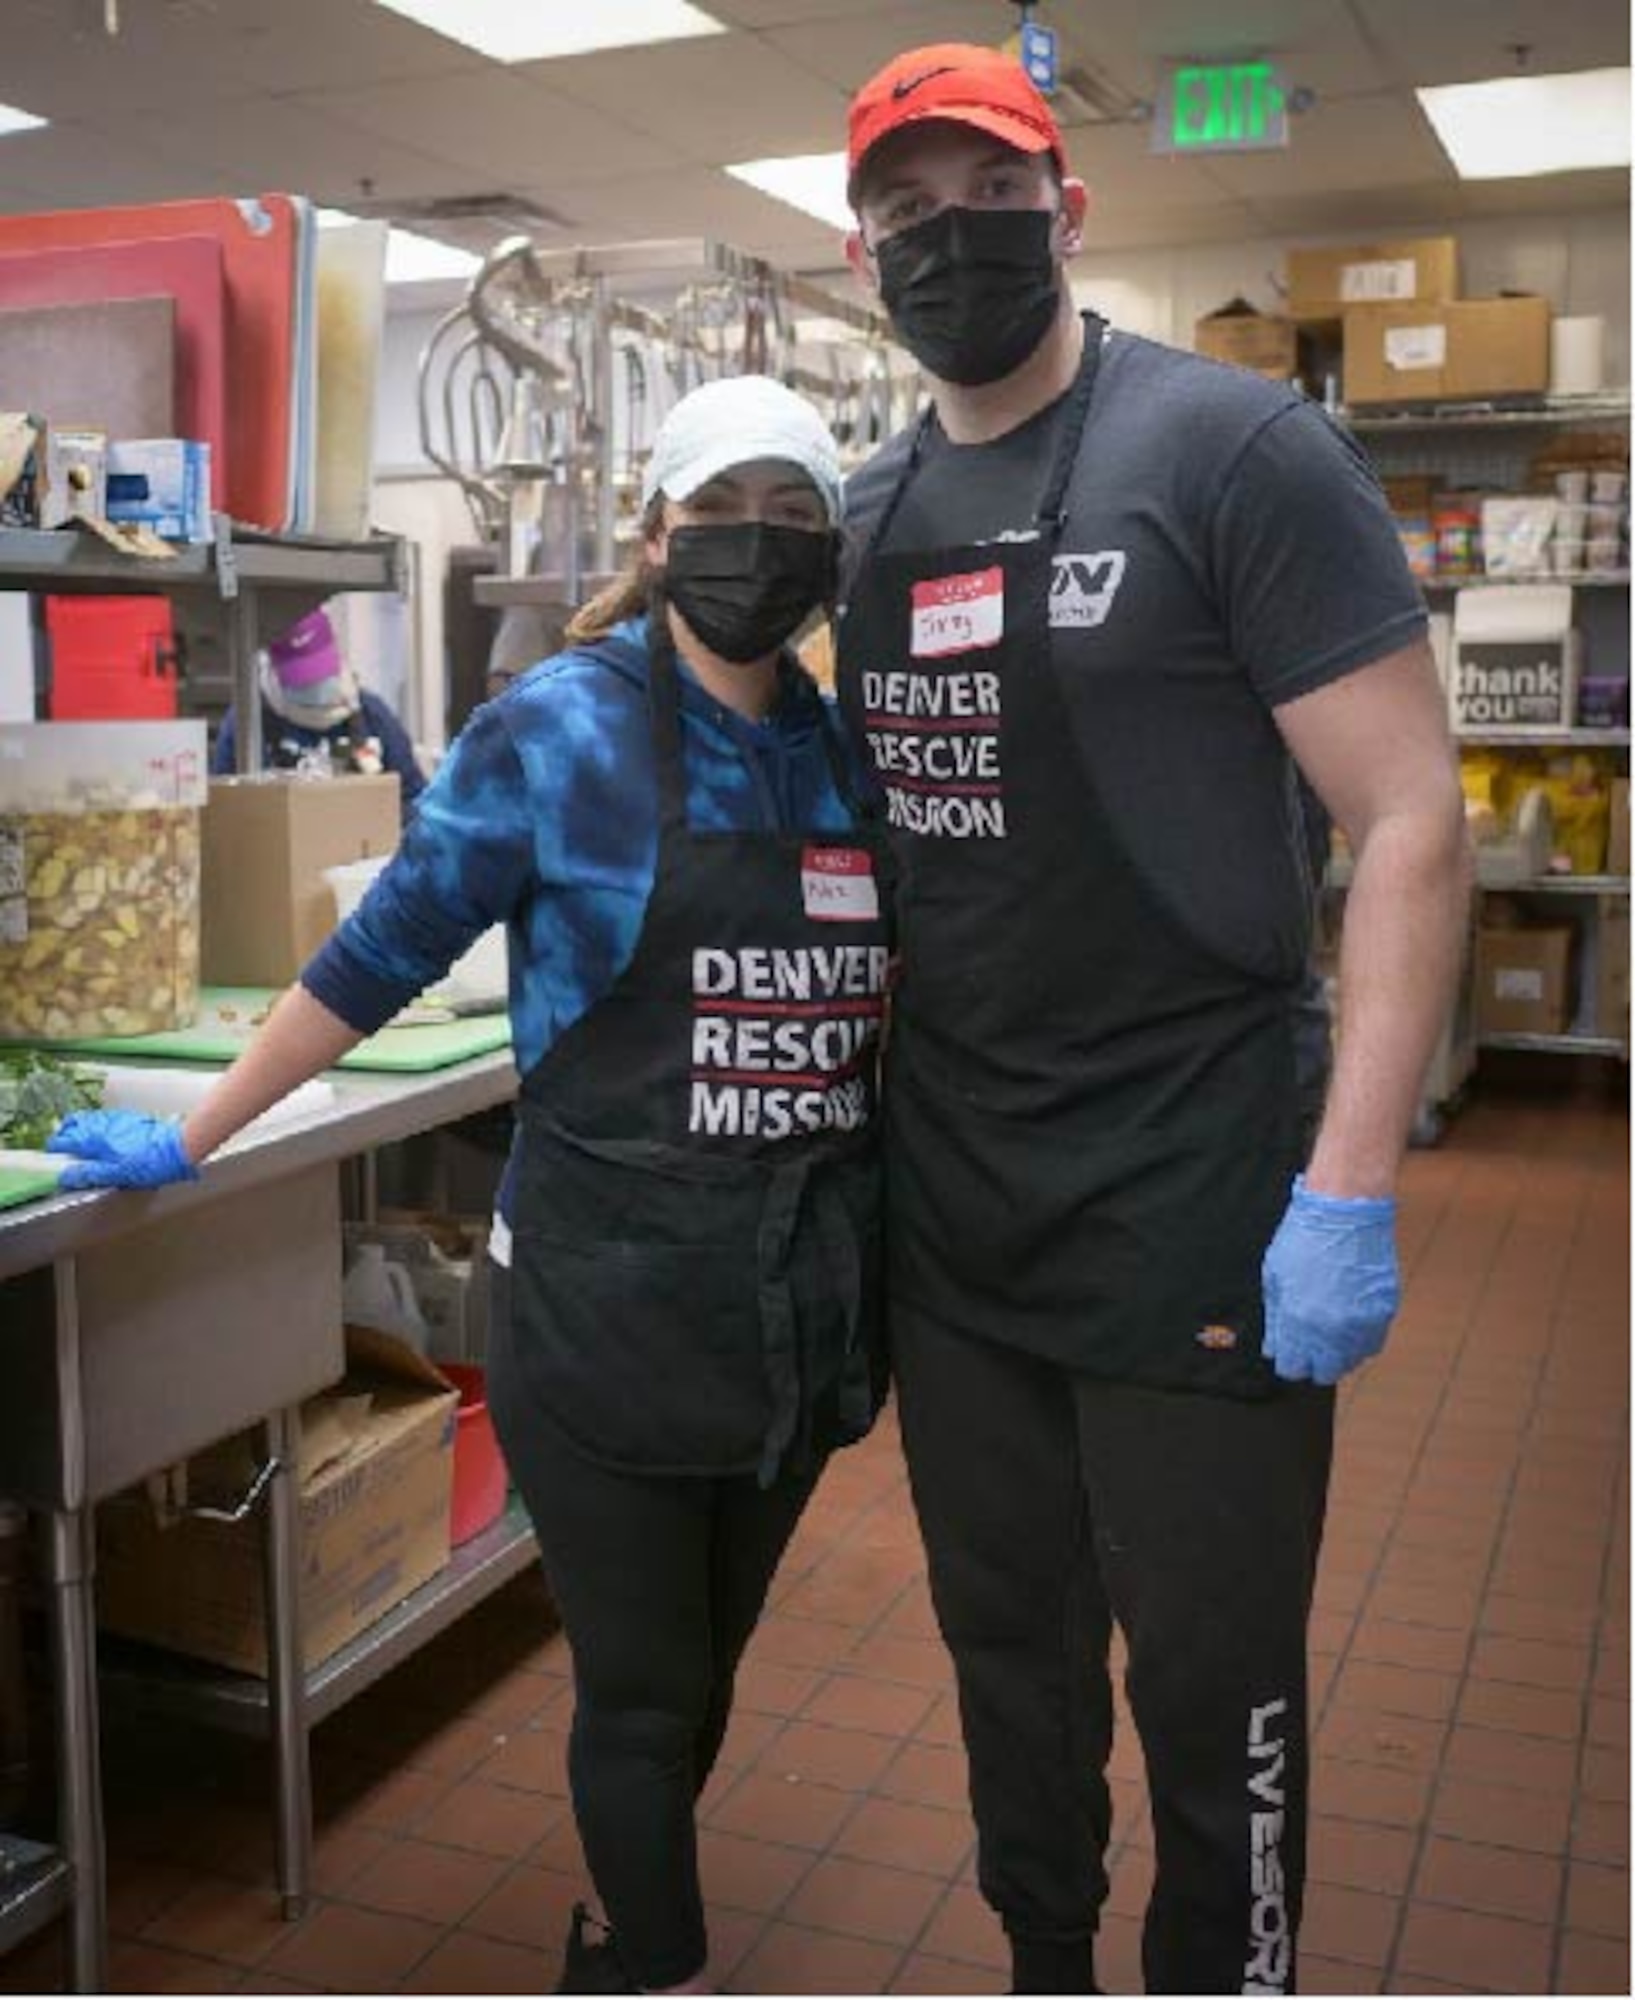 U.S. Air Force Staff Sgt. Jimmy Mrosko, an Air Guard and Reserve assignment technician, and his wife, Staff Sgt. Ashlee Sandefur, a Command Support Staff team member, both at Headquarters Air Reserve Personnel Center, prepares meals at Denver Rescue Mission Feb. 21, 2021, in Denver, Colo. Mrosko led the charge of developing a volunteer team from HQ ARPC in serving the 6,104 homeless persons of the Denver community on a bimonthly basis. (U.S. Air Force photo by Master Sgt. Leisa Grant/Released)